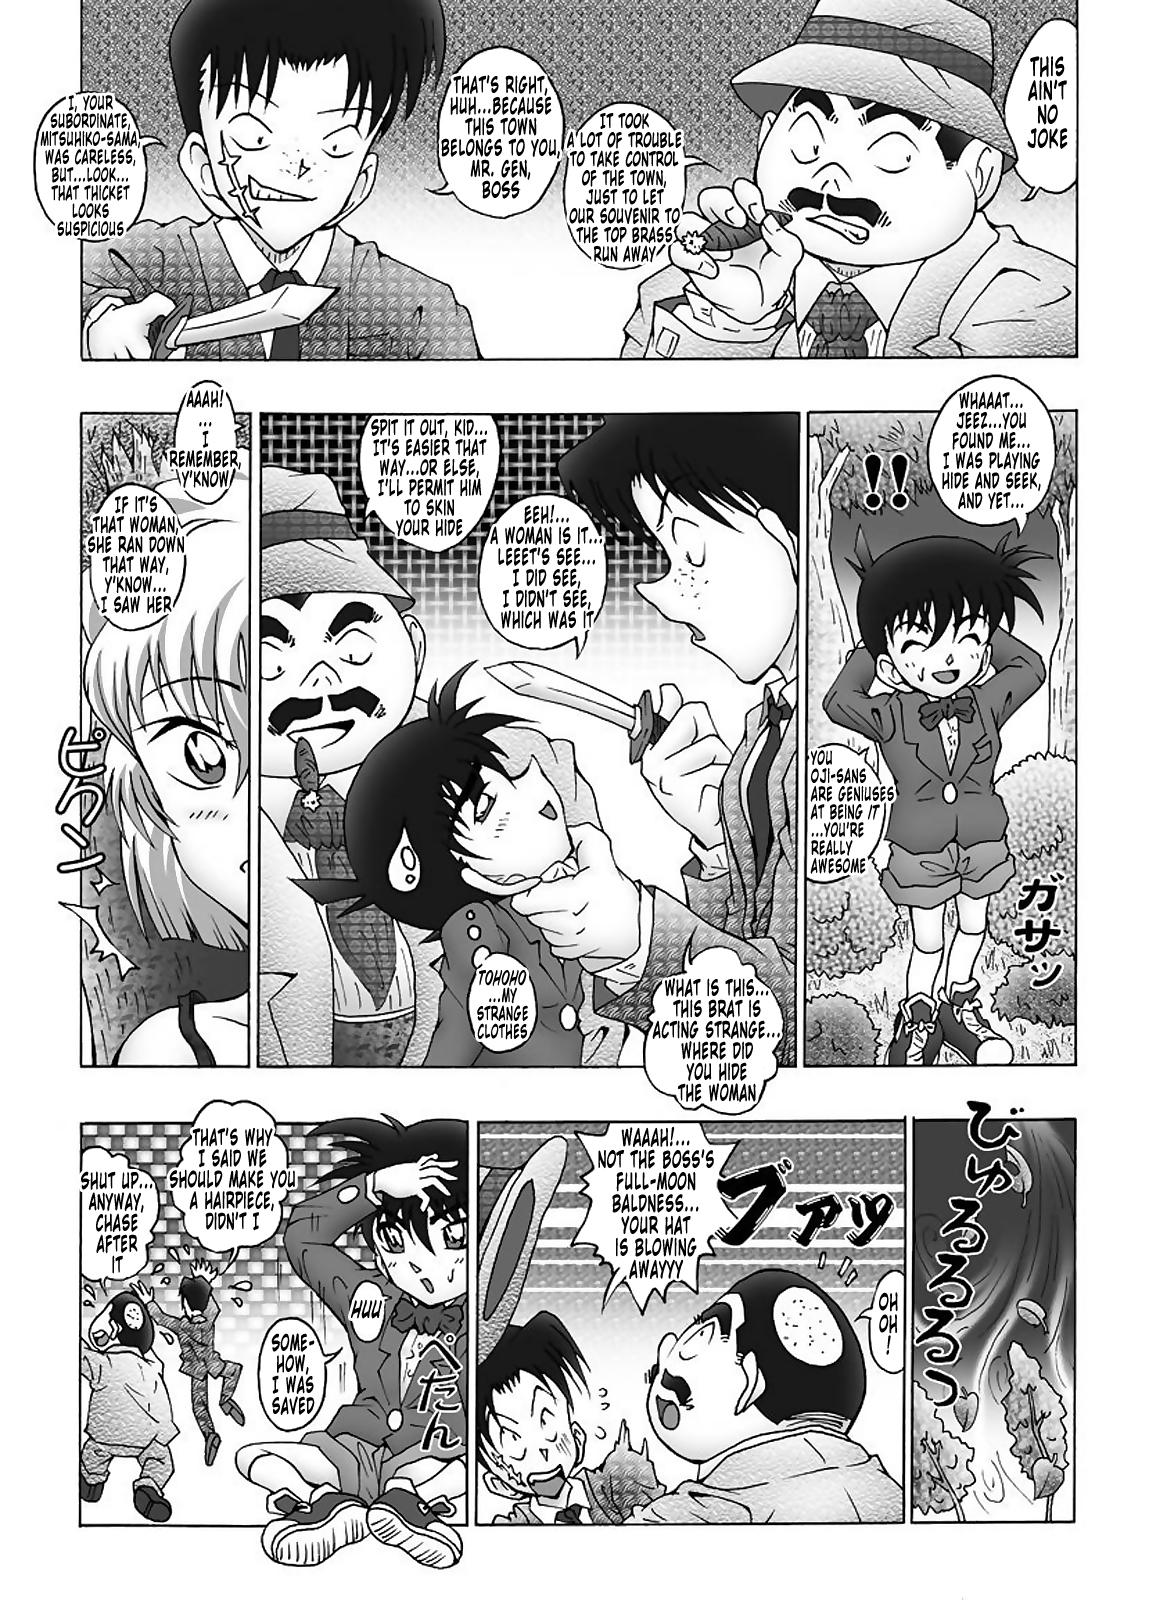 Bumbling Detective Conan - File 12: The Case of Back To The Future 9